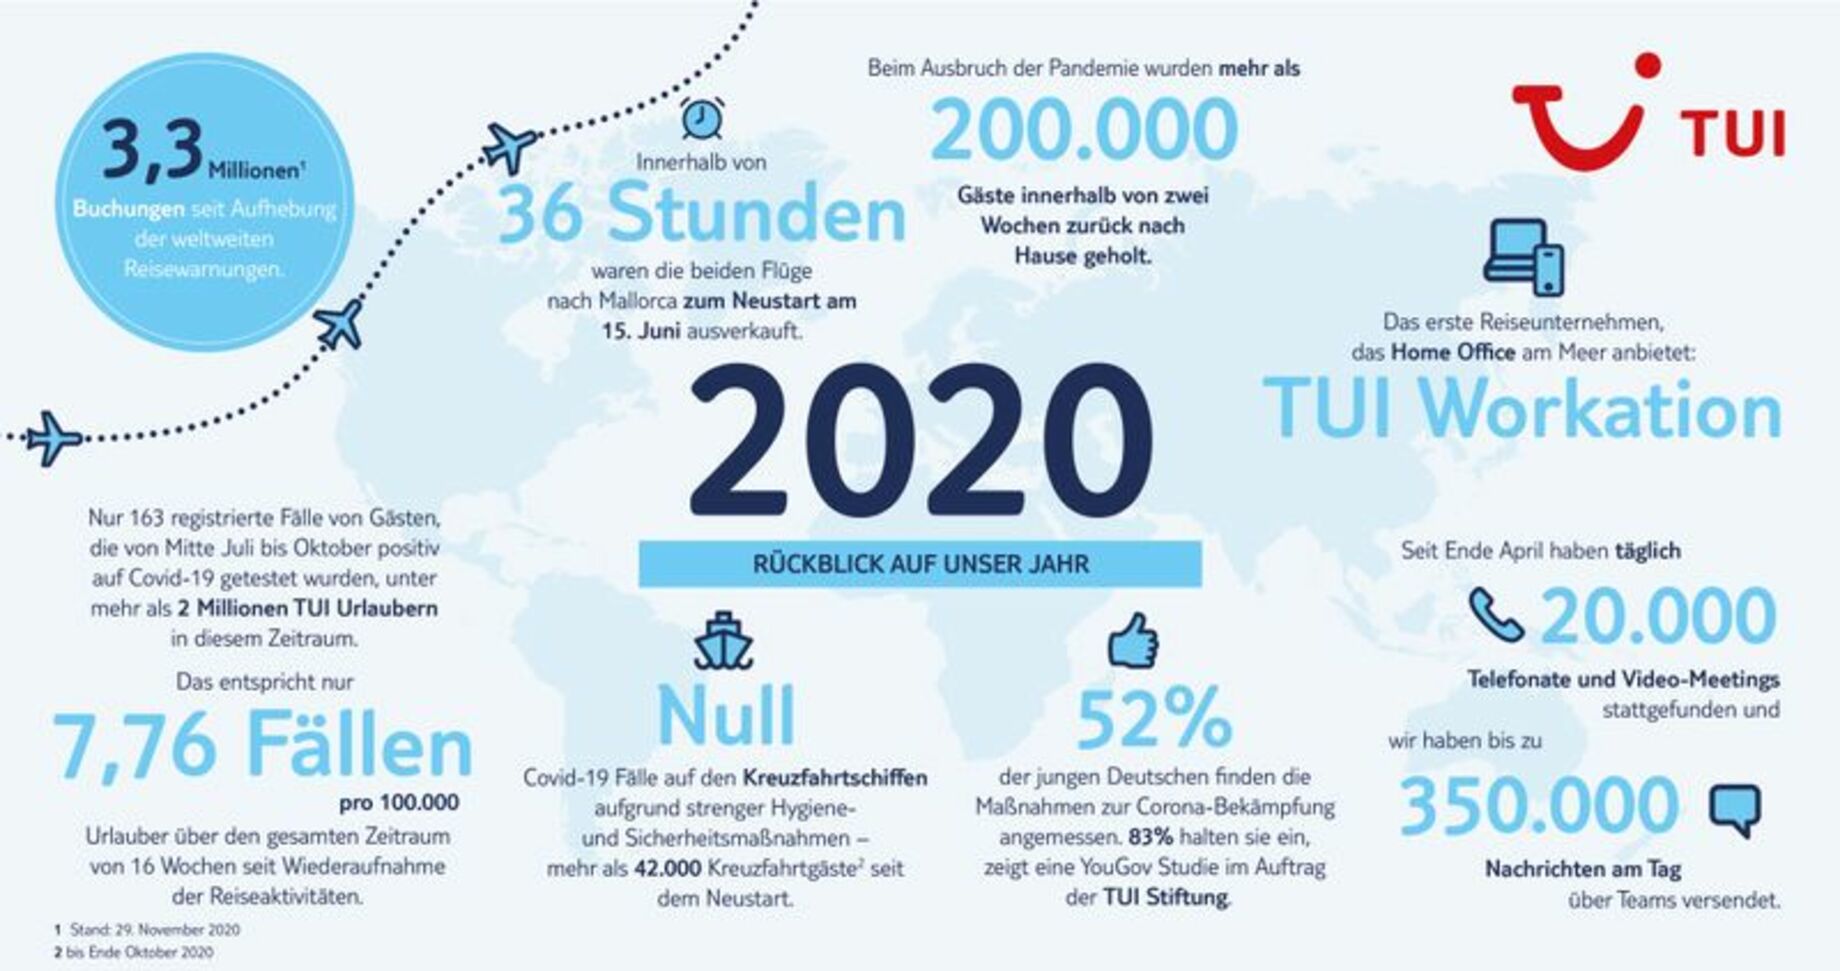 TUI Group - End of year infographic - German Version v2